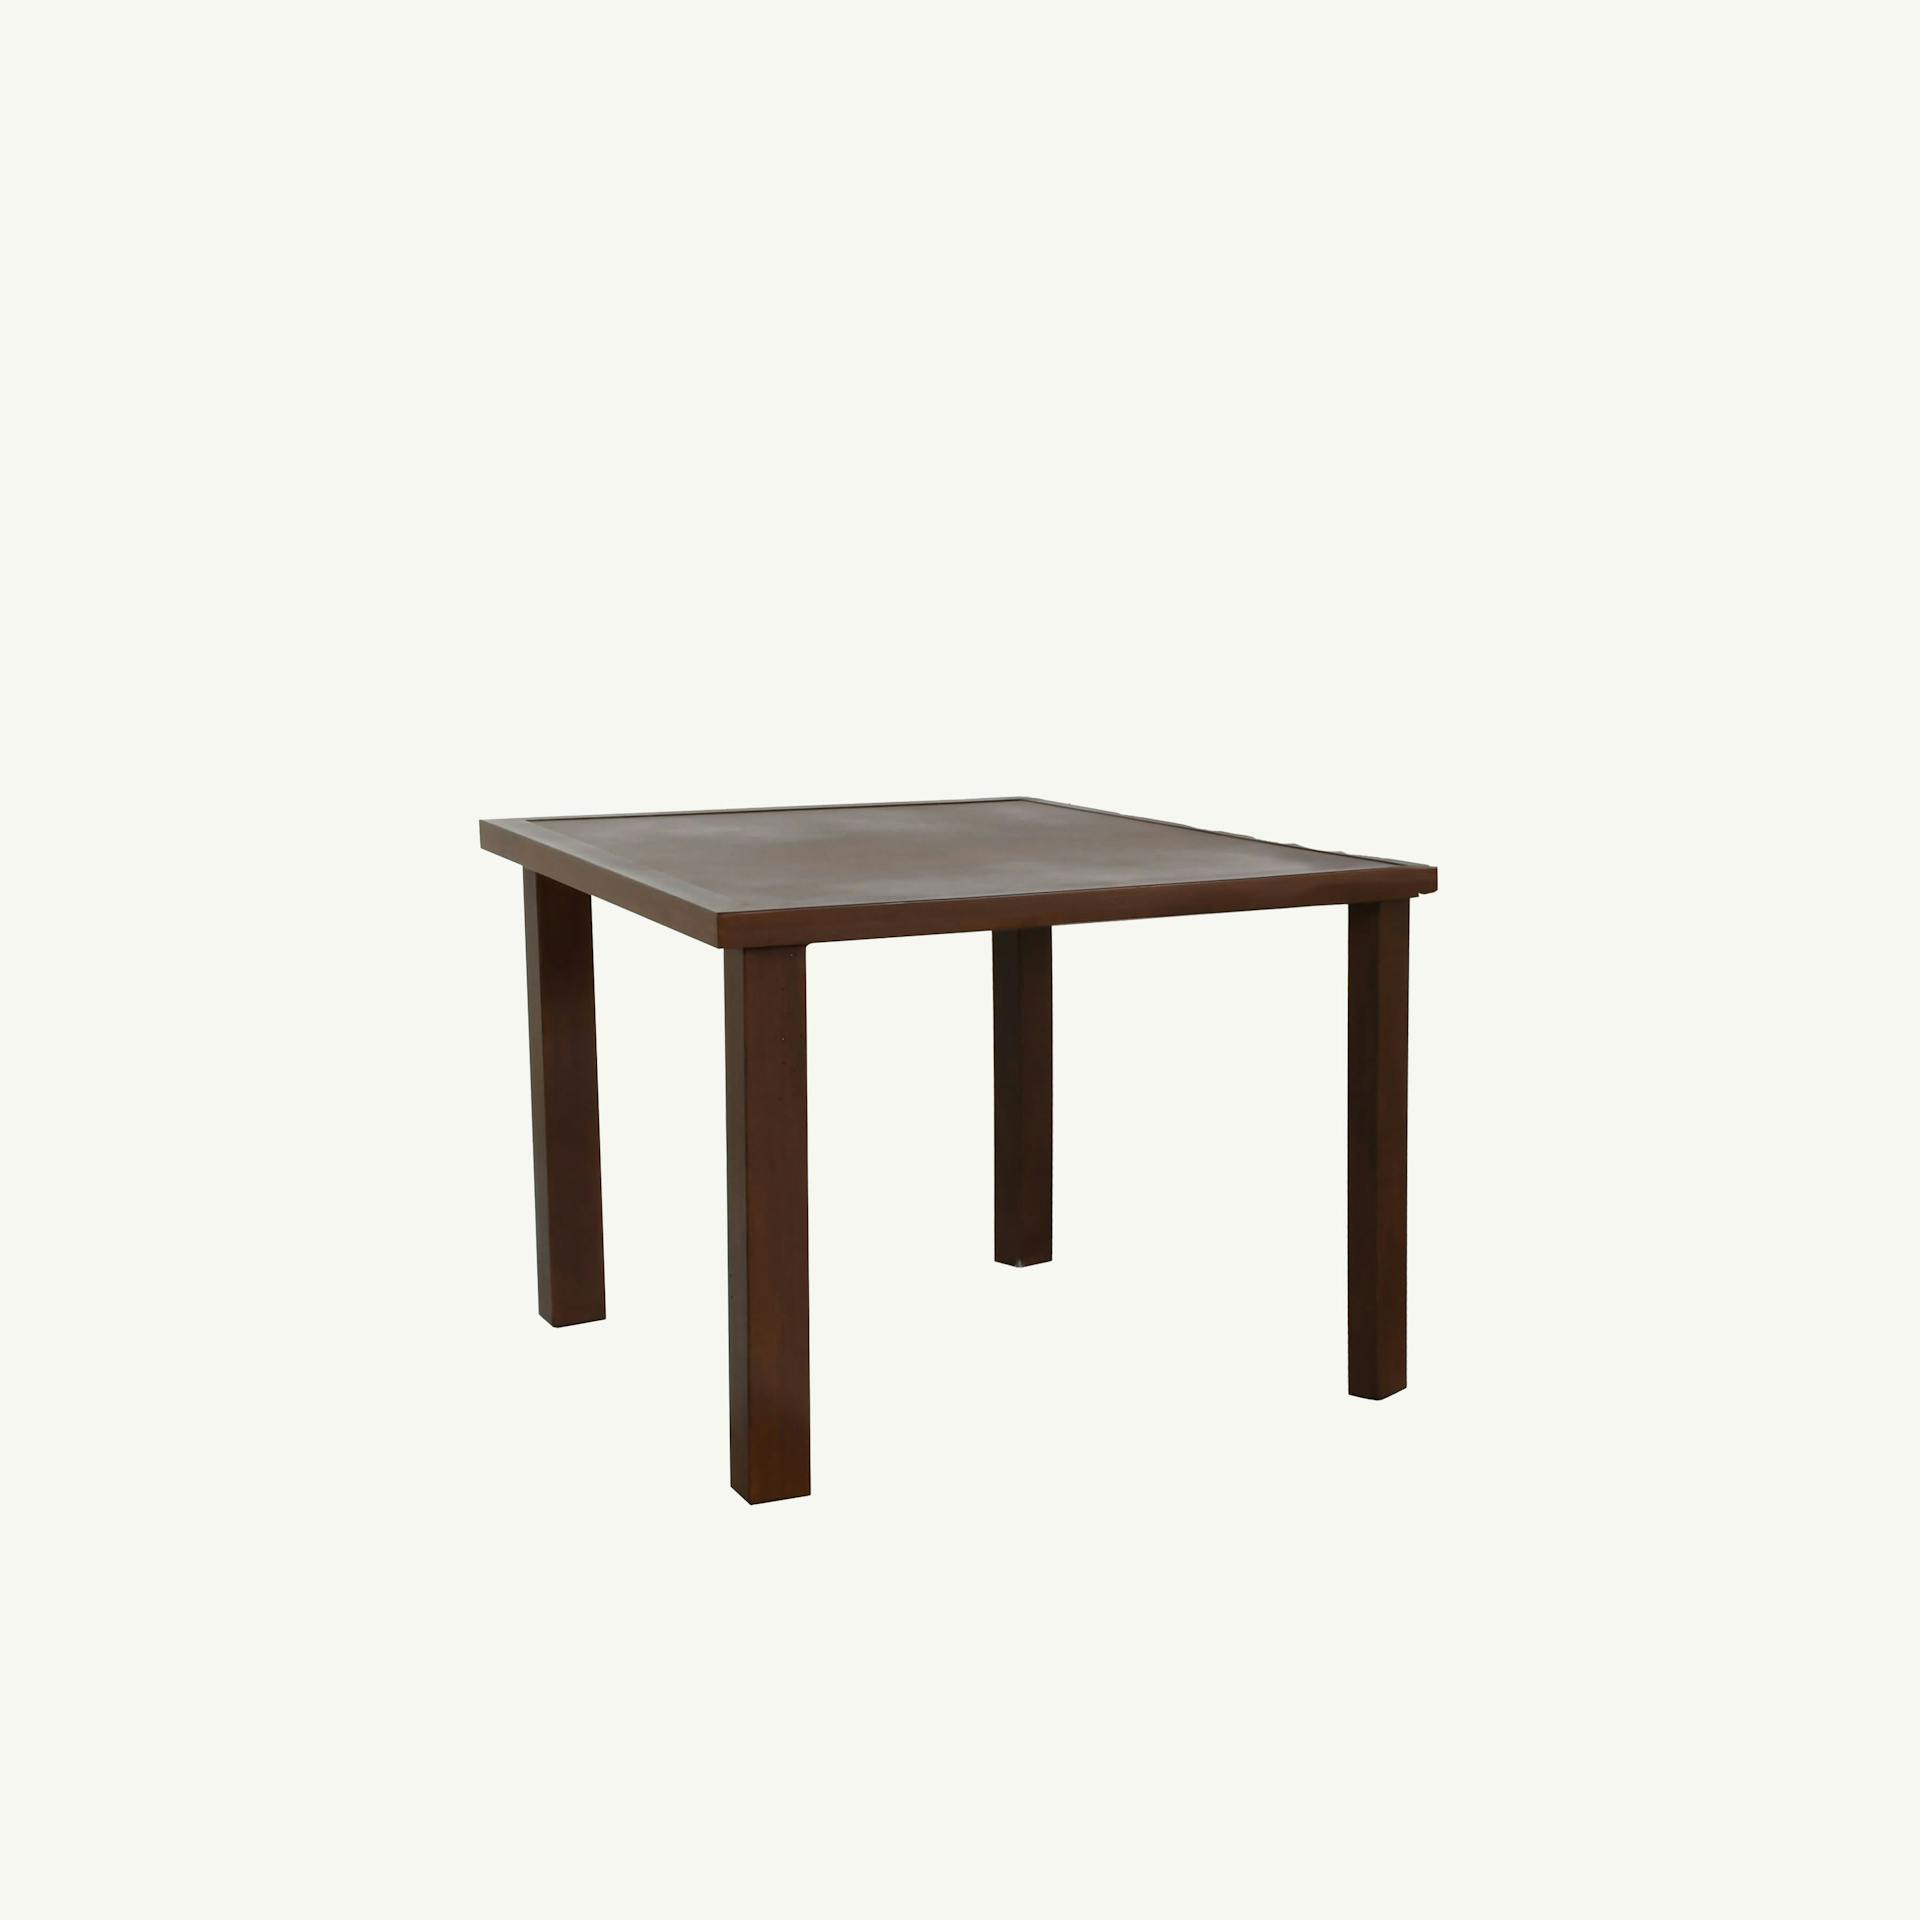 Parsons Tables 42 x 42" Square Table